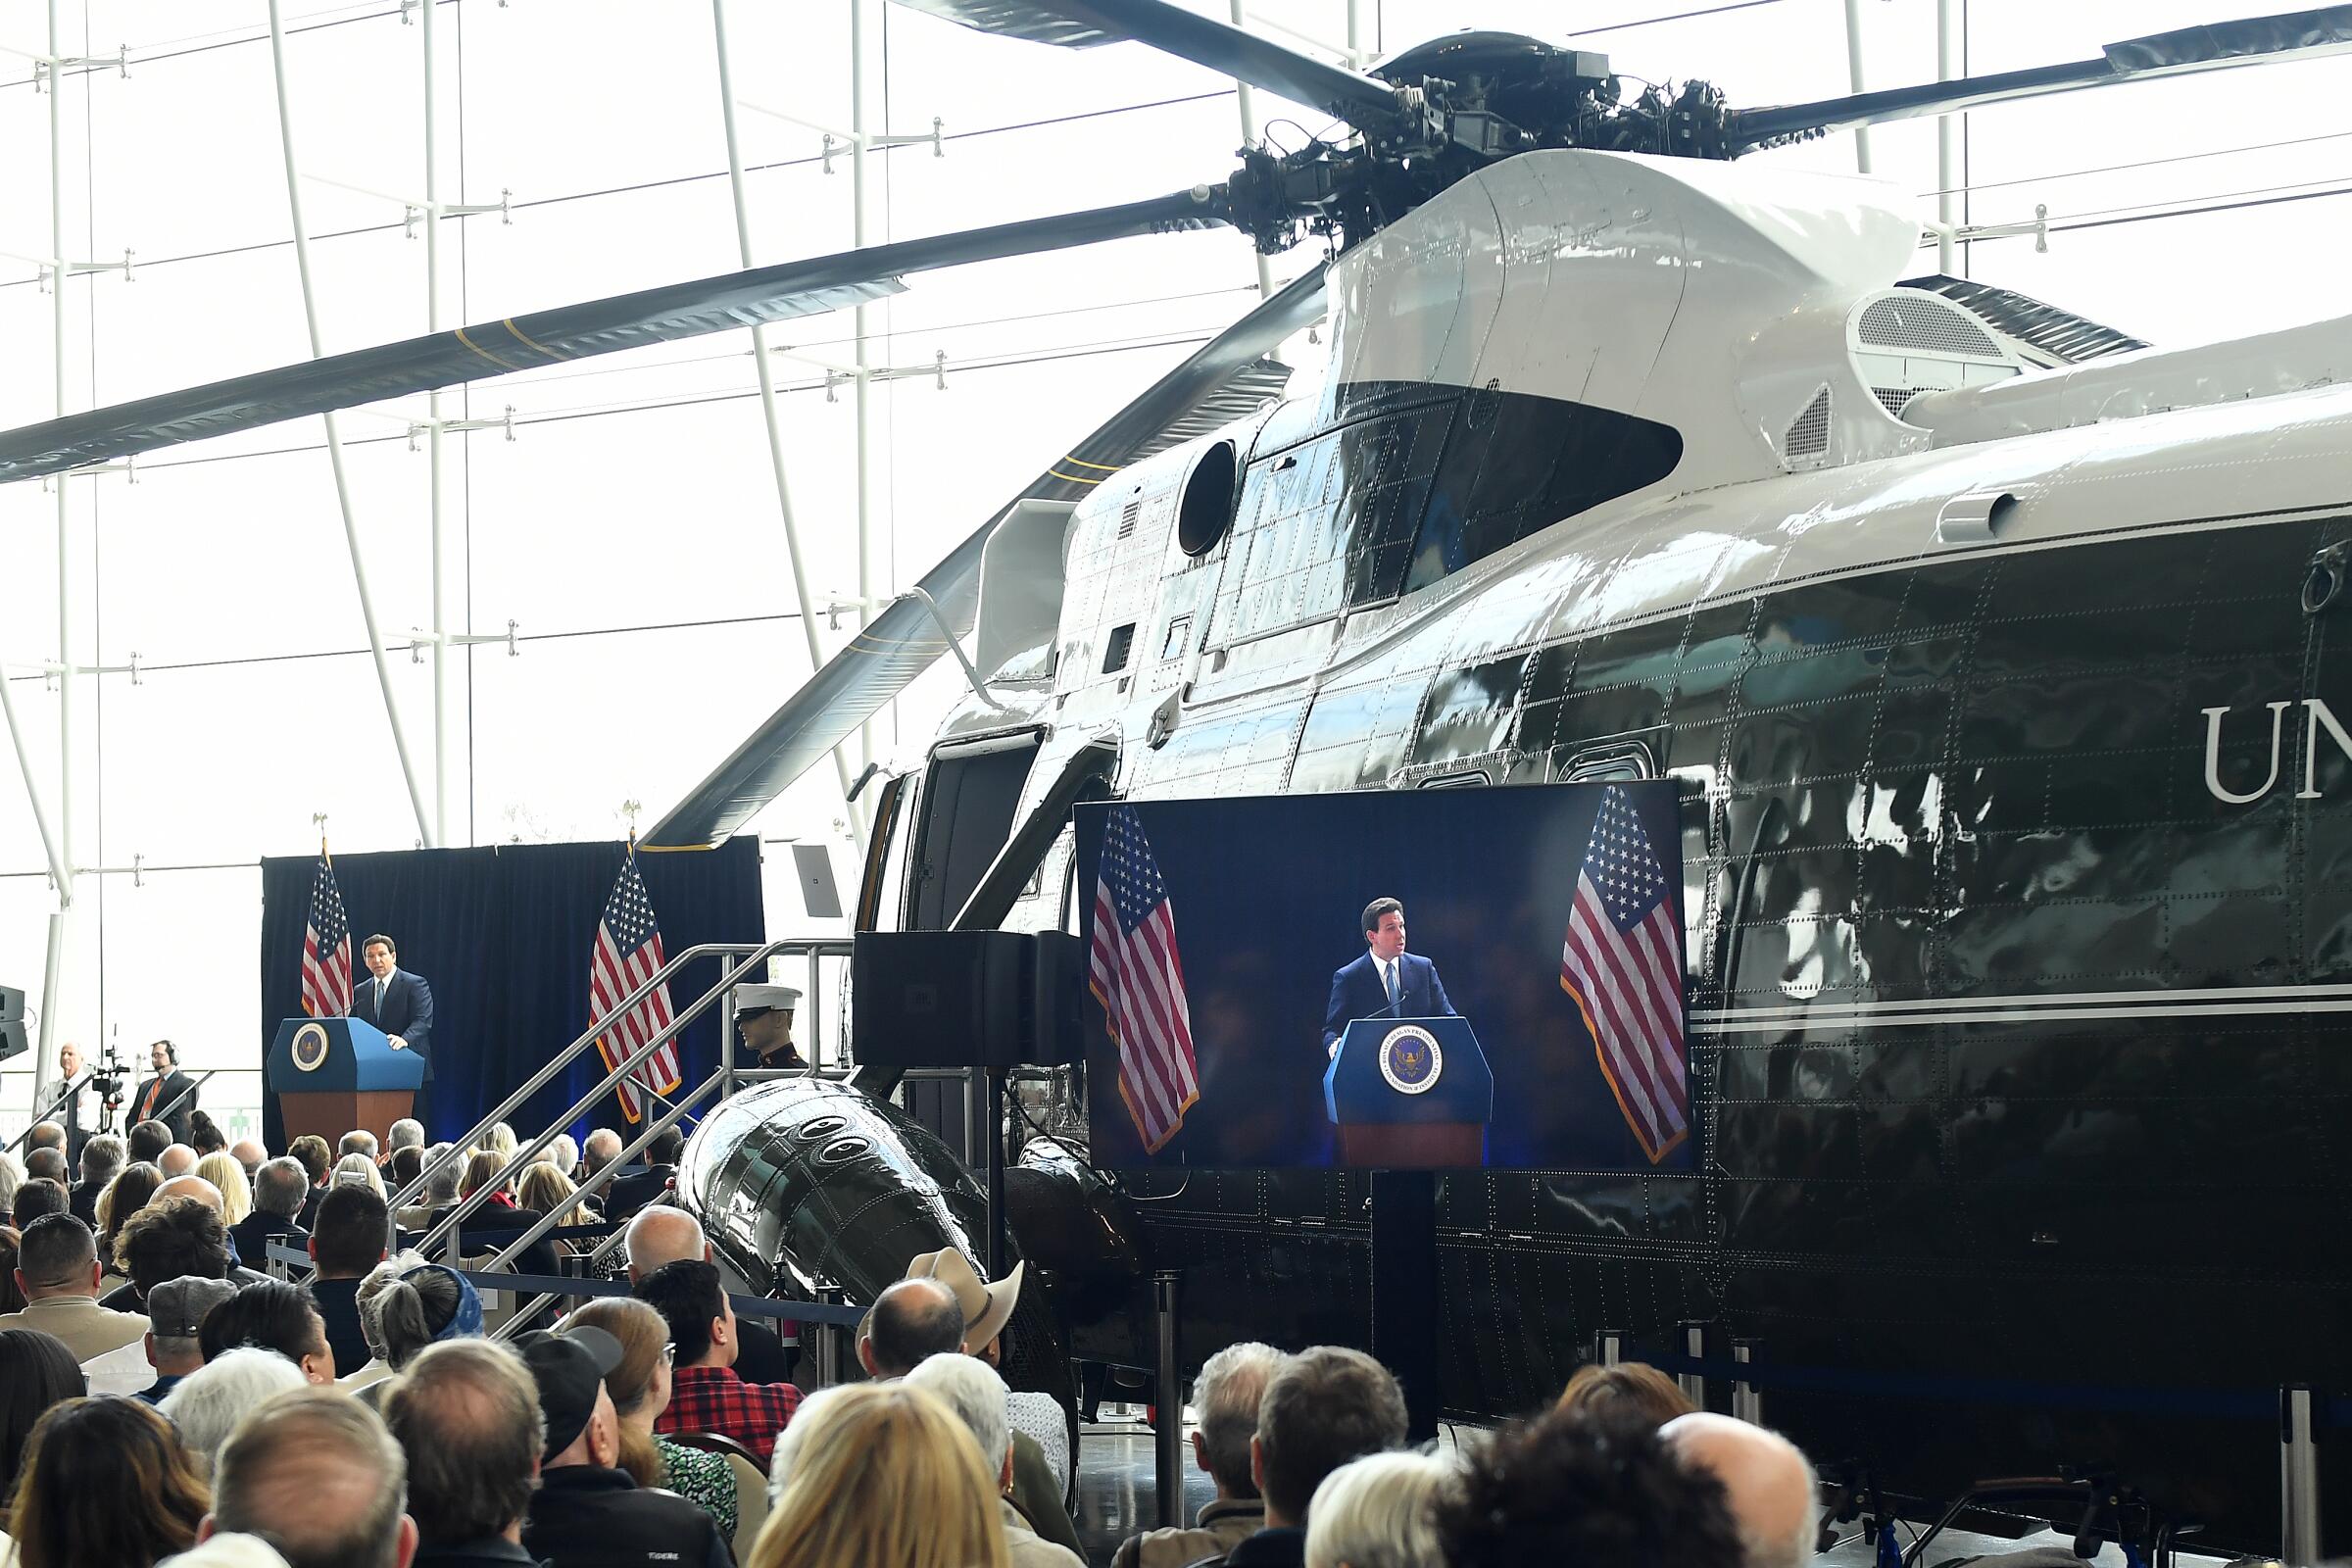 A man speaks from a podium to a crowd in front of a presidential helicopter in an exhibit hall